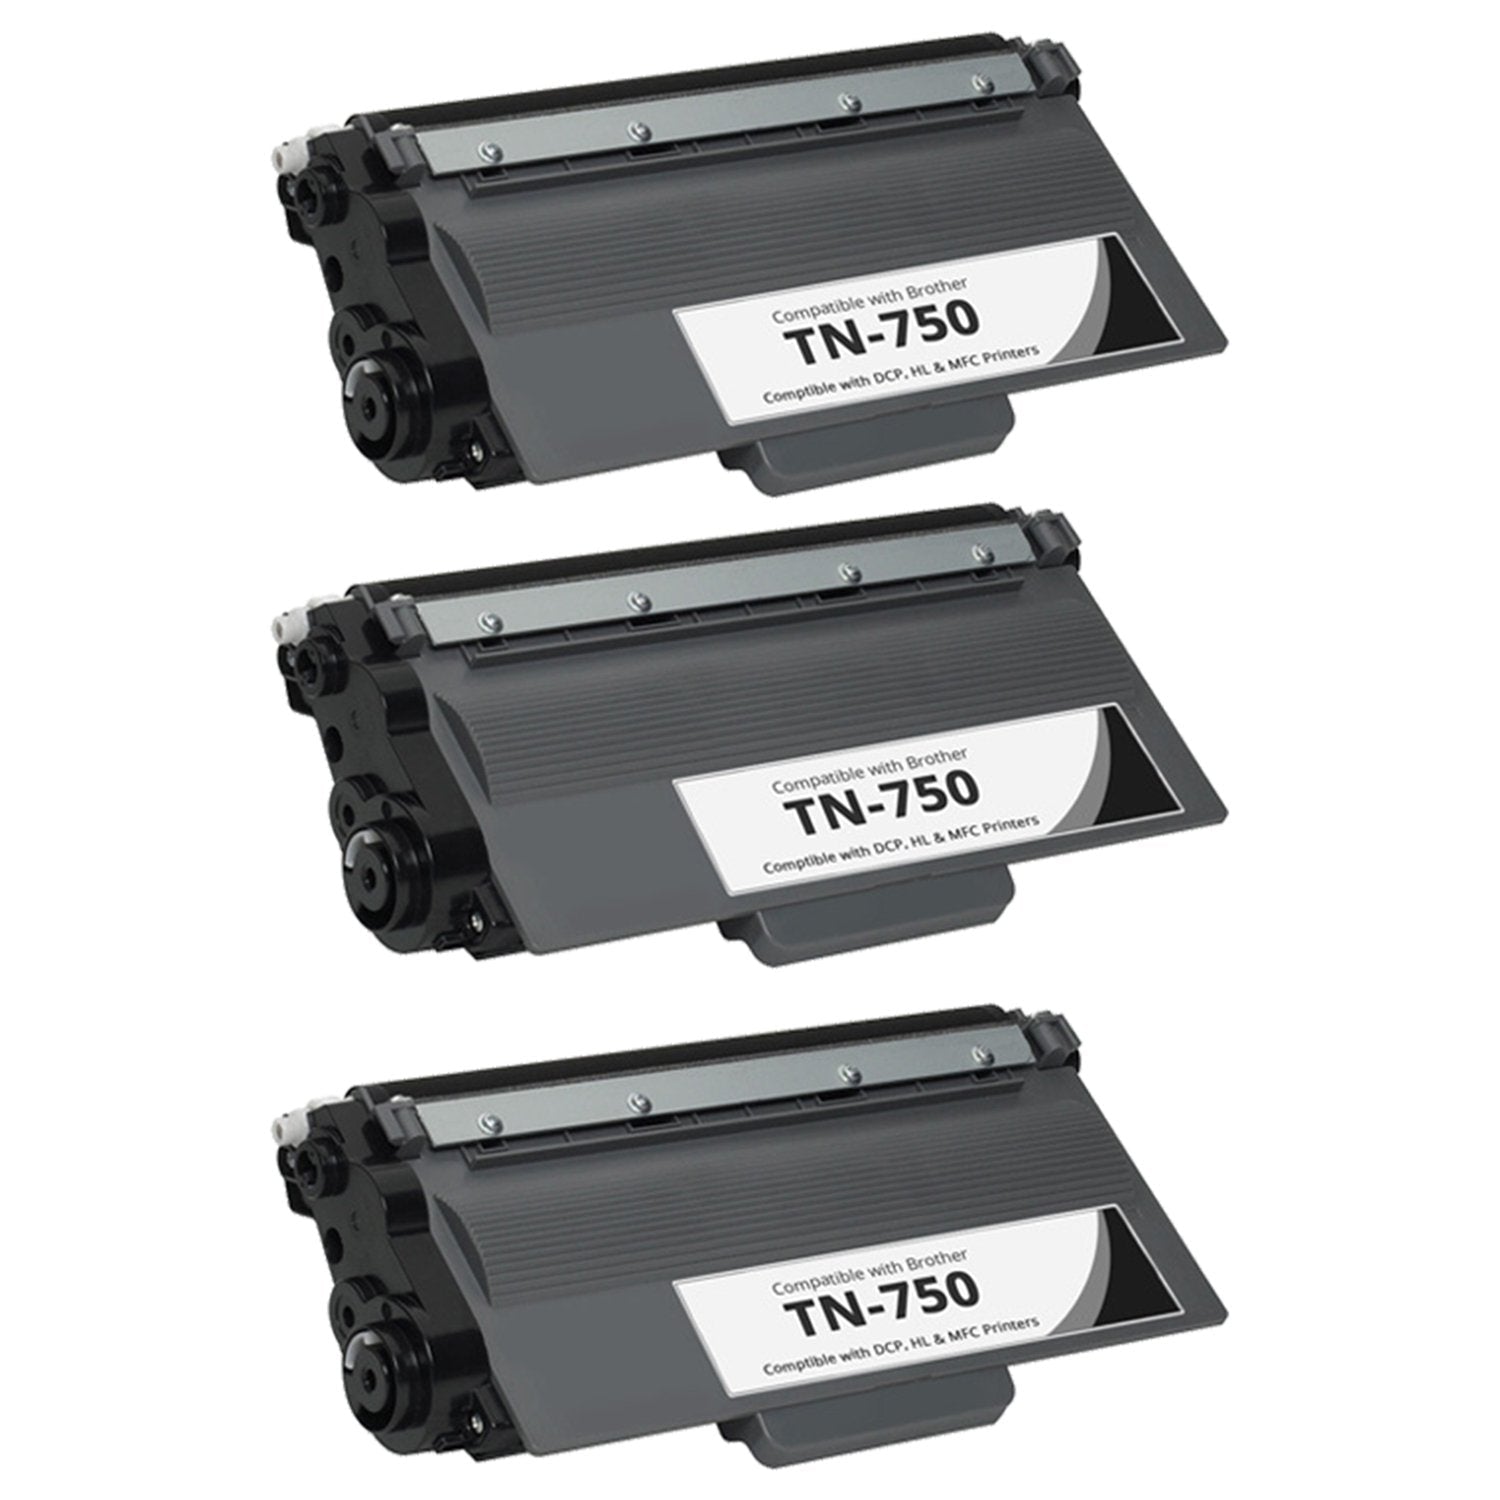 Absolute Toner Compatible Brother TN750 High Yield Black Toner Cartridge | Absolute Toner Brother Toner Cartridges